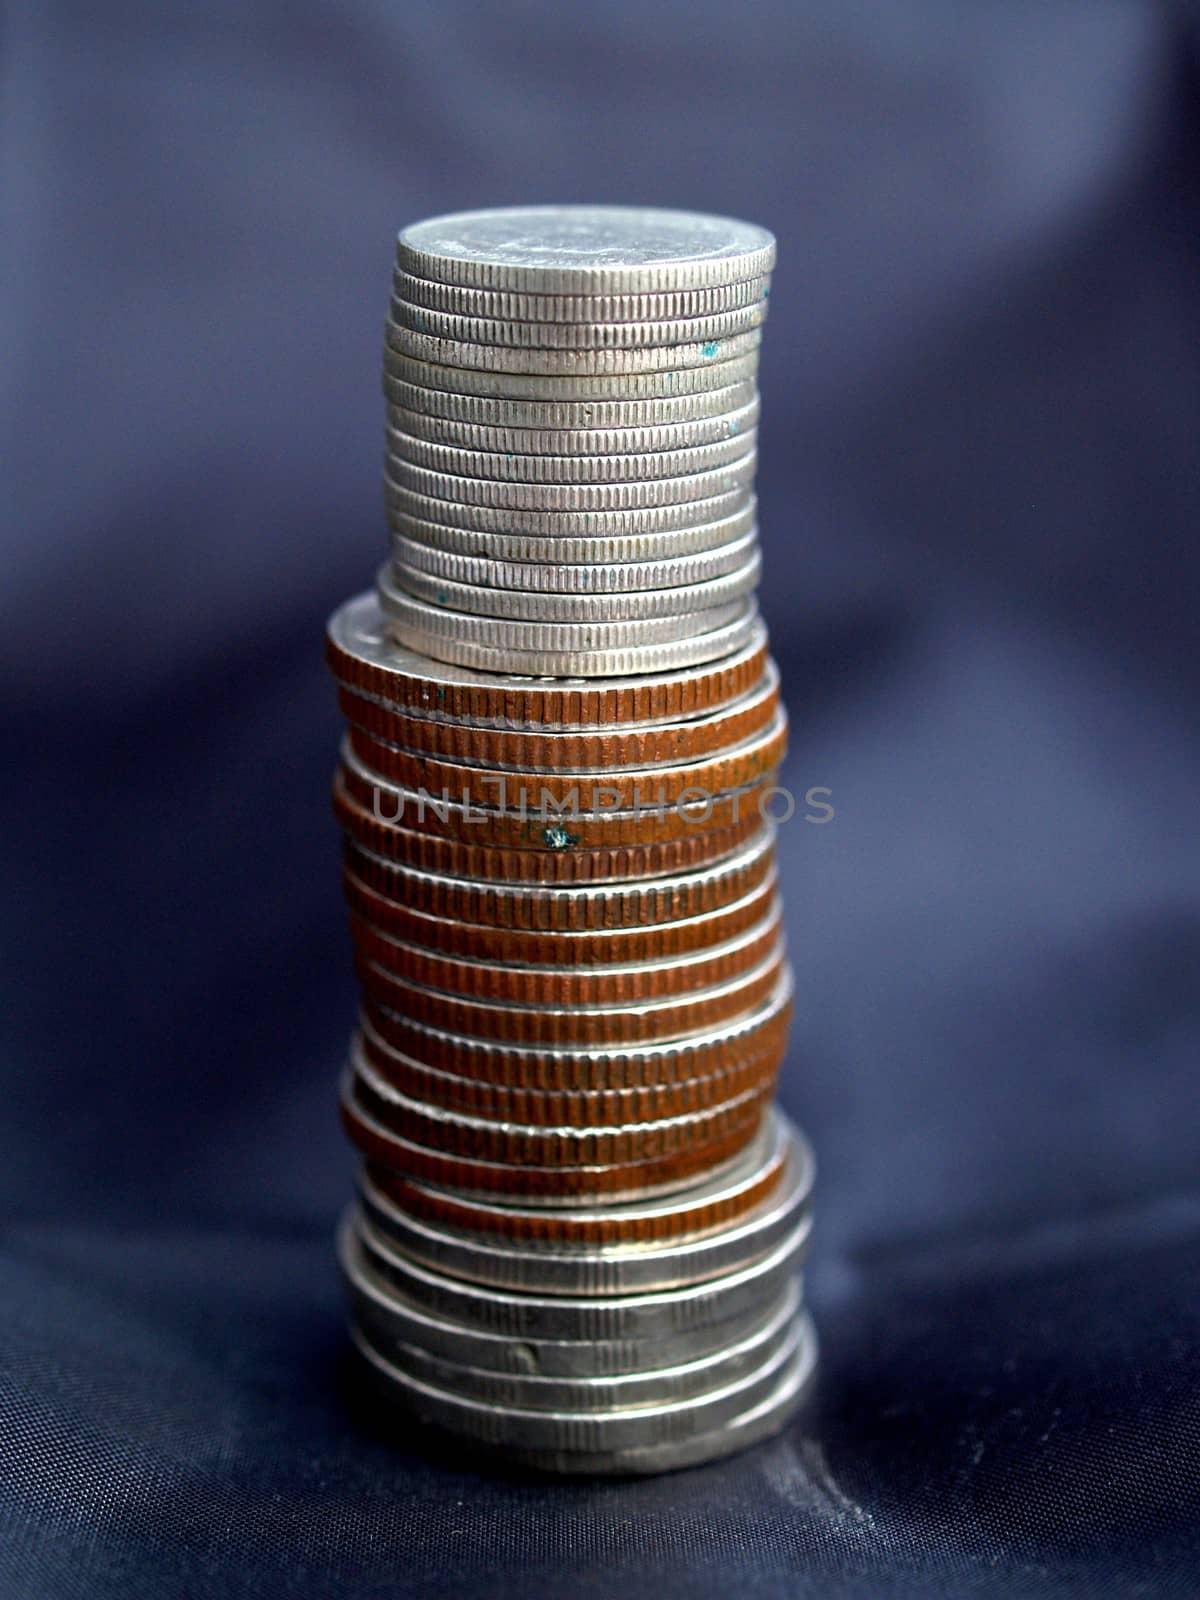 money coin stack